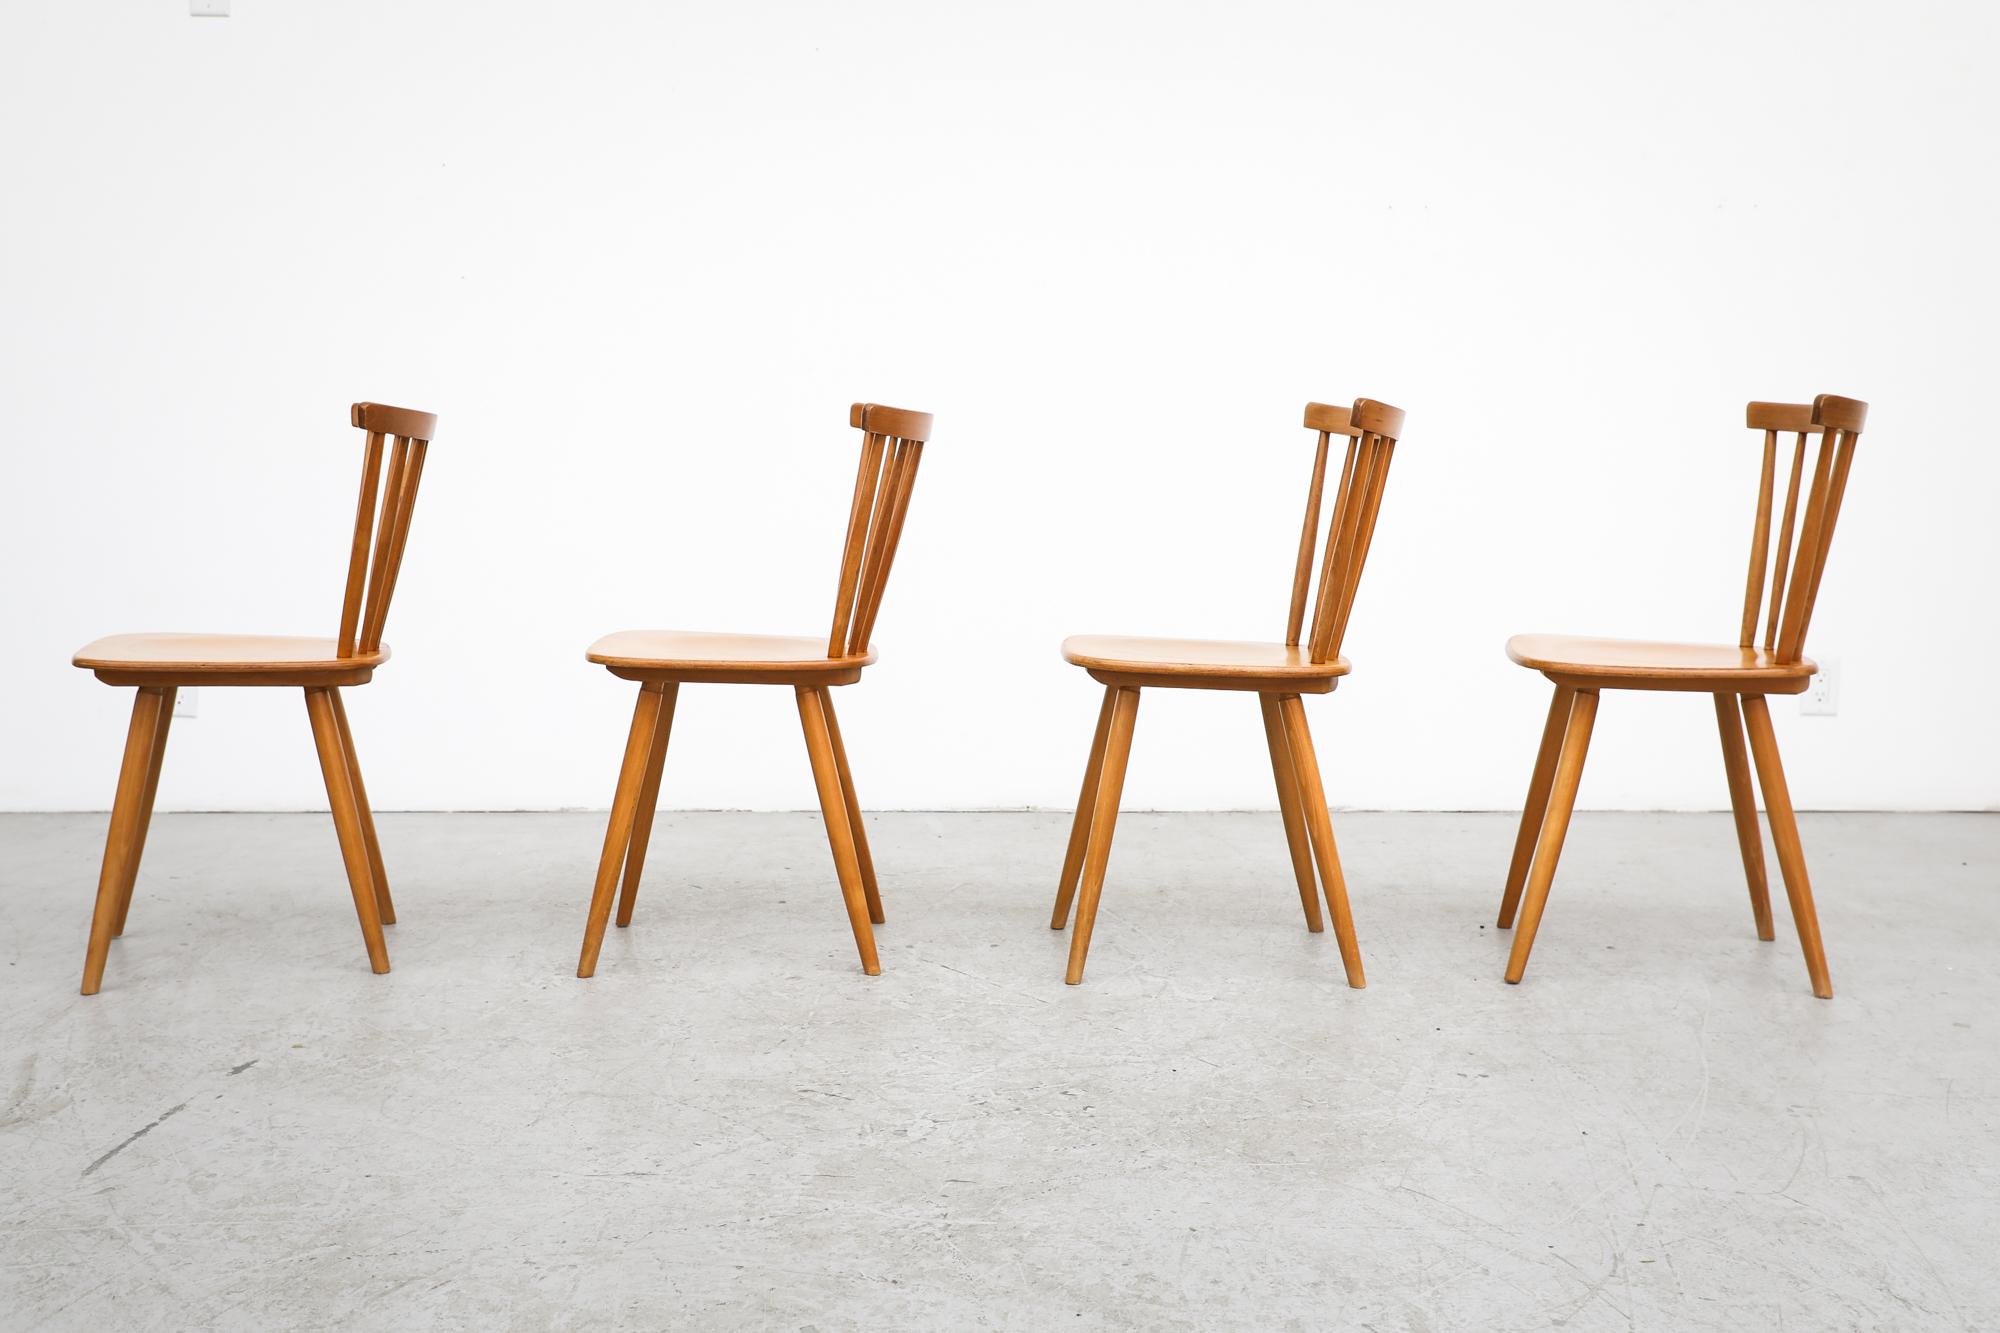 Danish Set of 4 Blonde Wood Tapiovaara Inspired Spindle Back Chairs by Farstrup For Sale